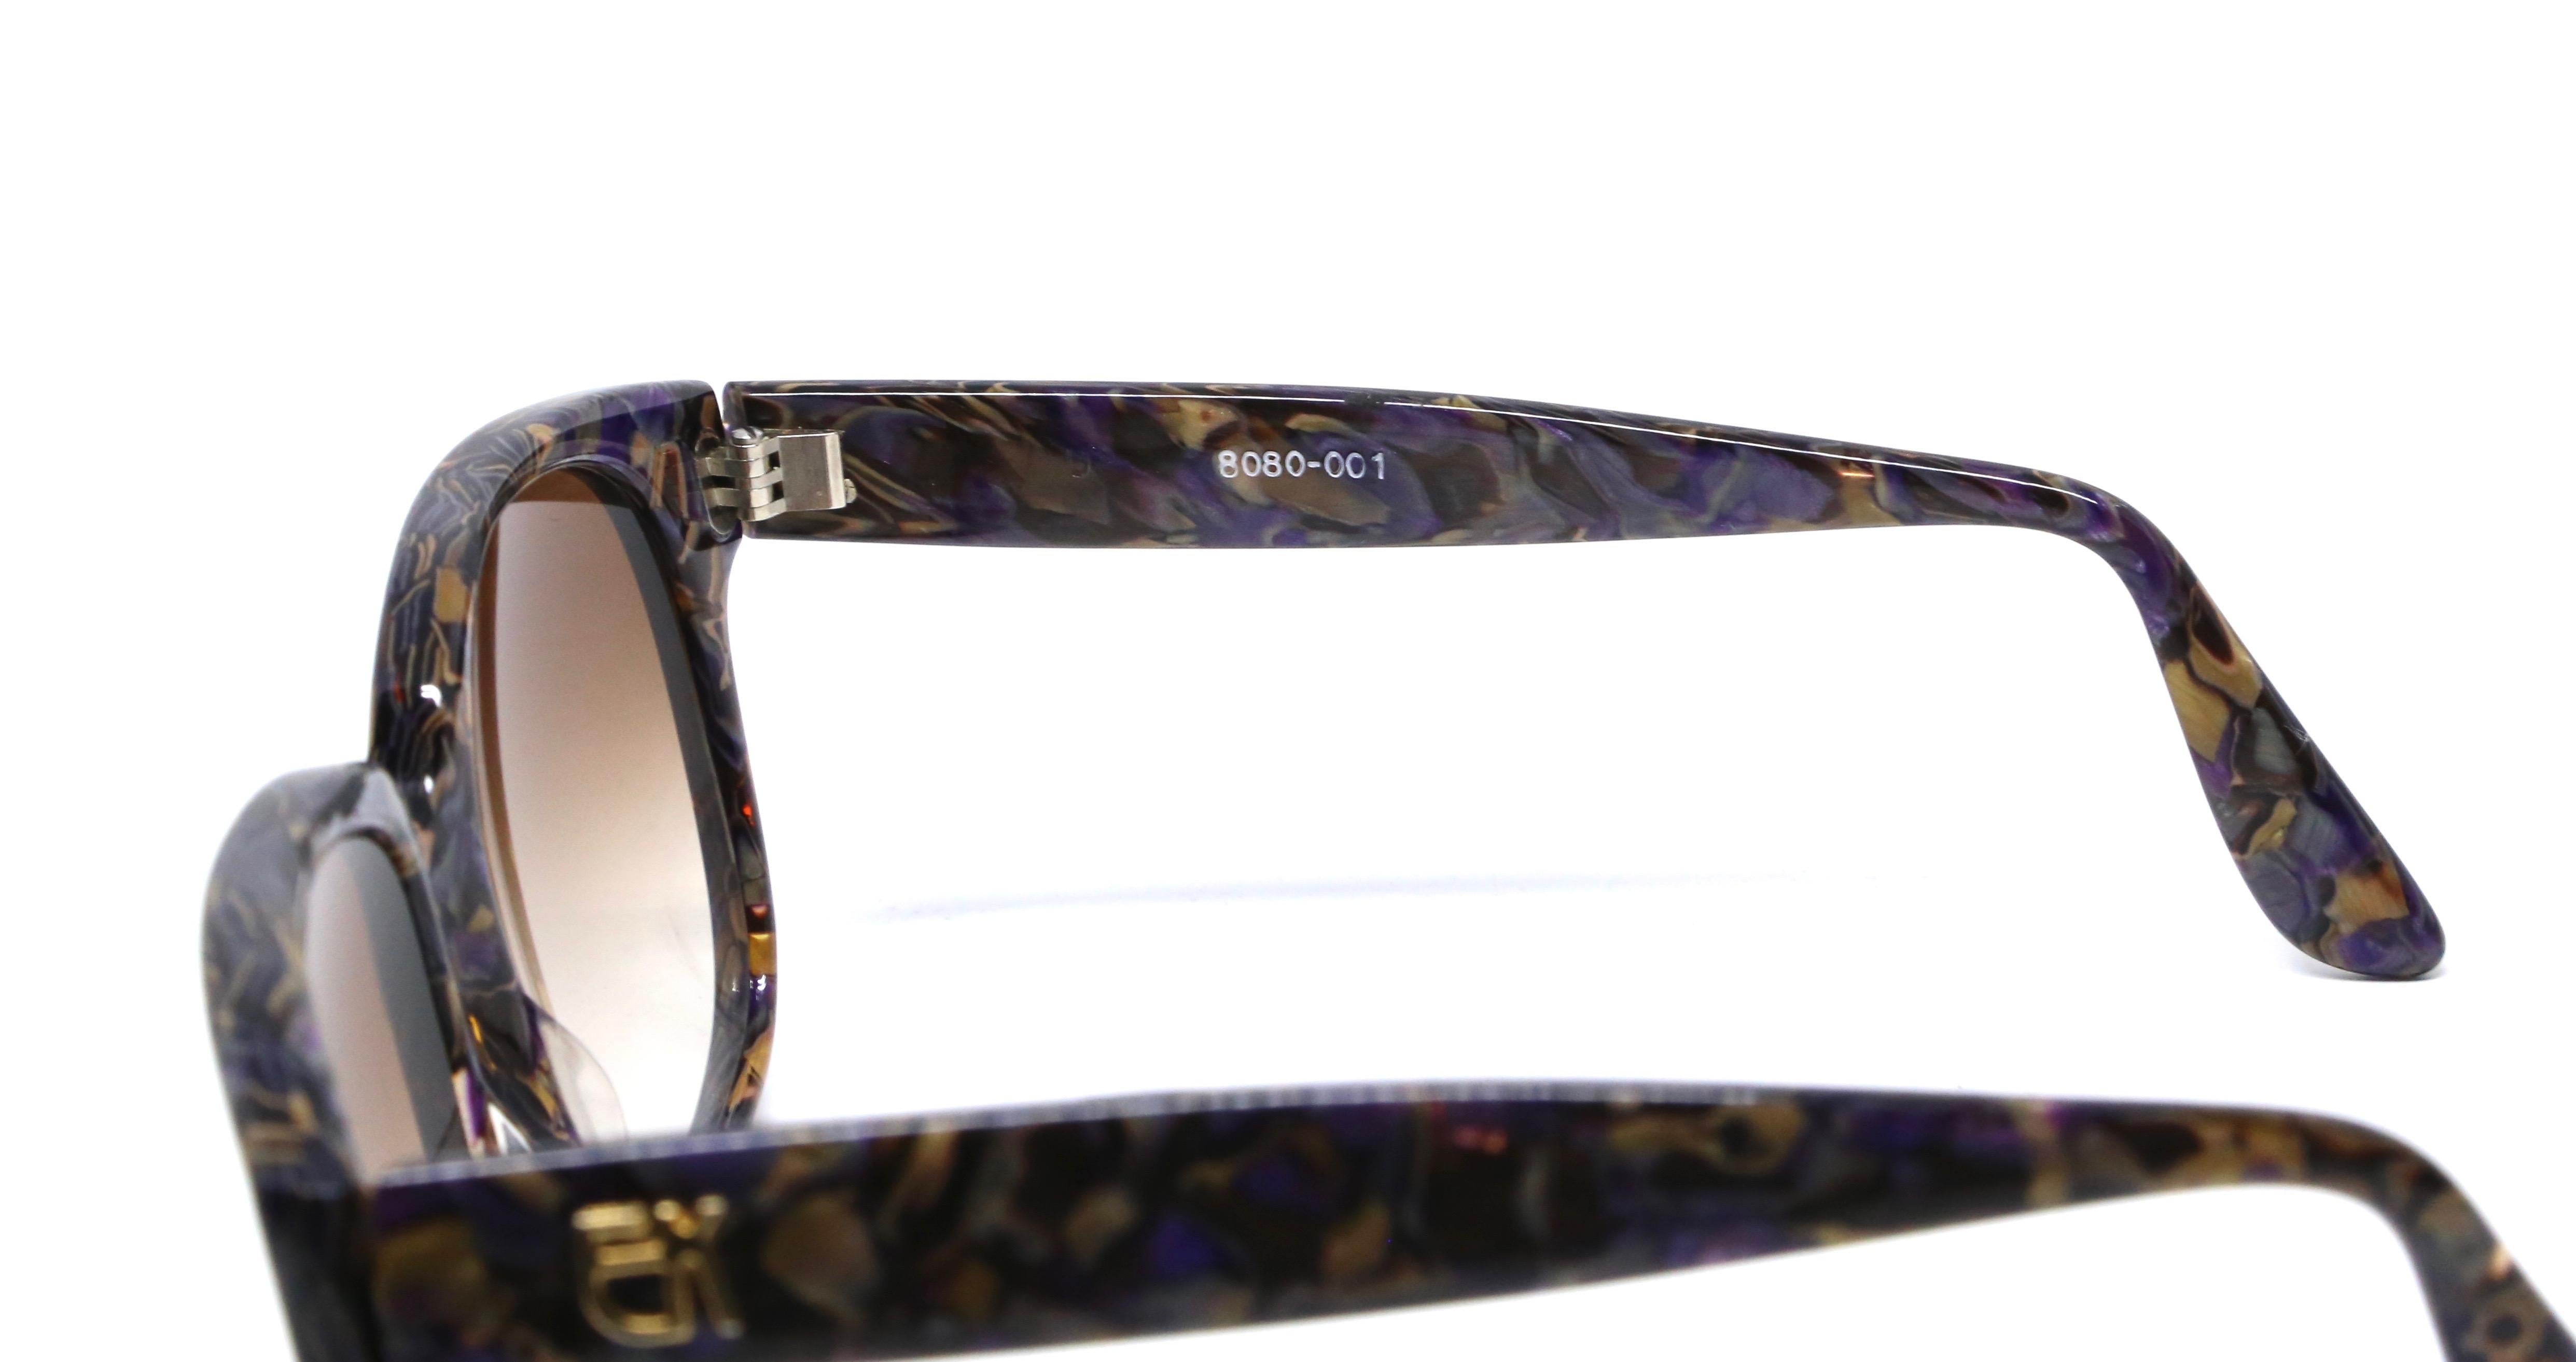 Vivid purple and bronze mosaic sunglasses with gold-toned EK logos at temples and golden brown hued lenses from Emmanuelle Khanh dating to the late 1970's, early 1980's. Oversized frames work well for a medium or larger sized face. Approximate